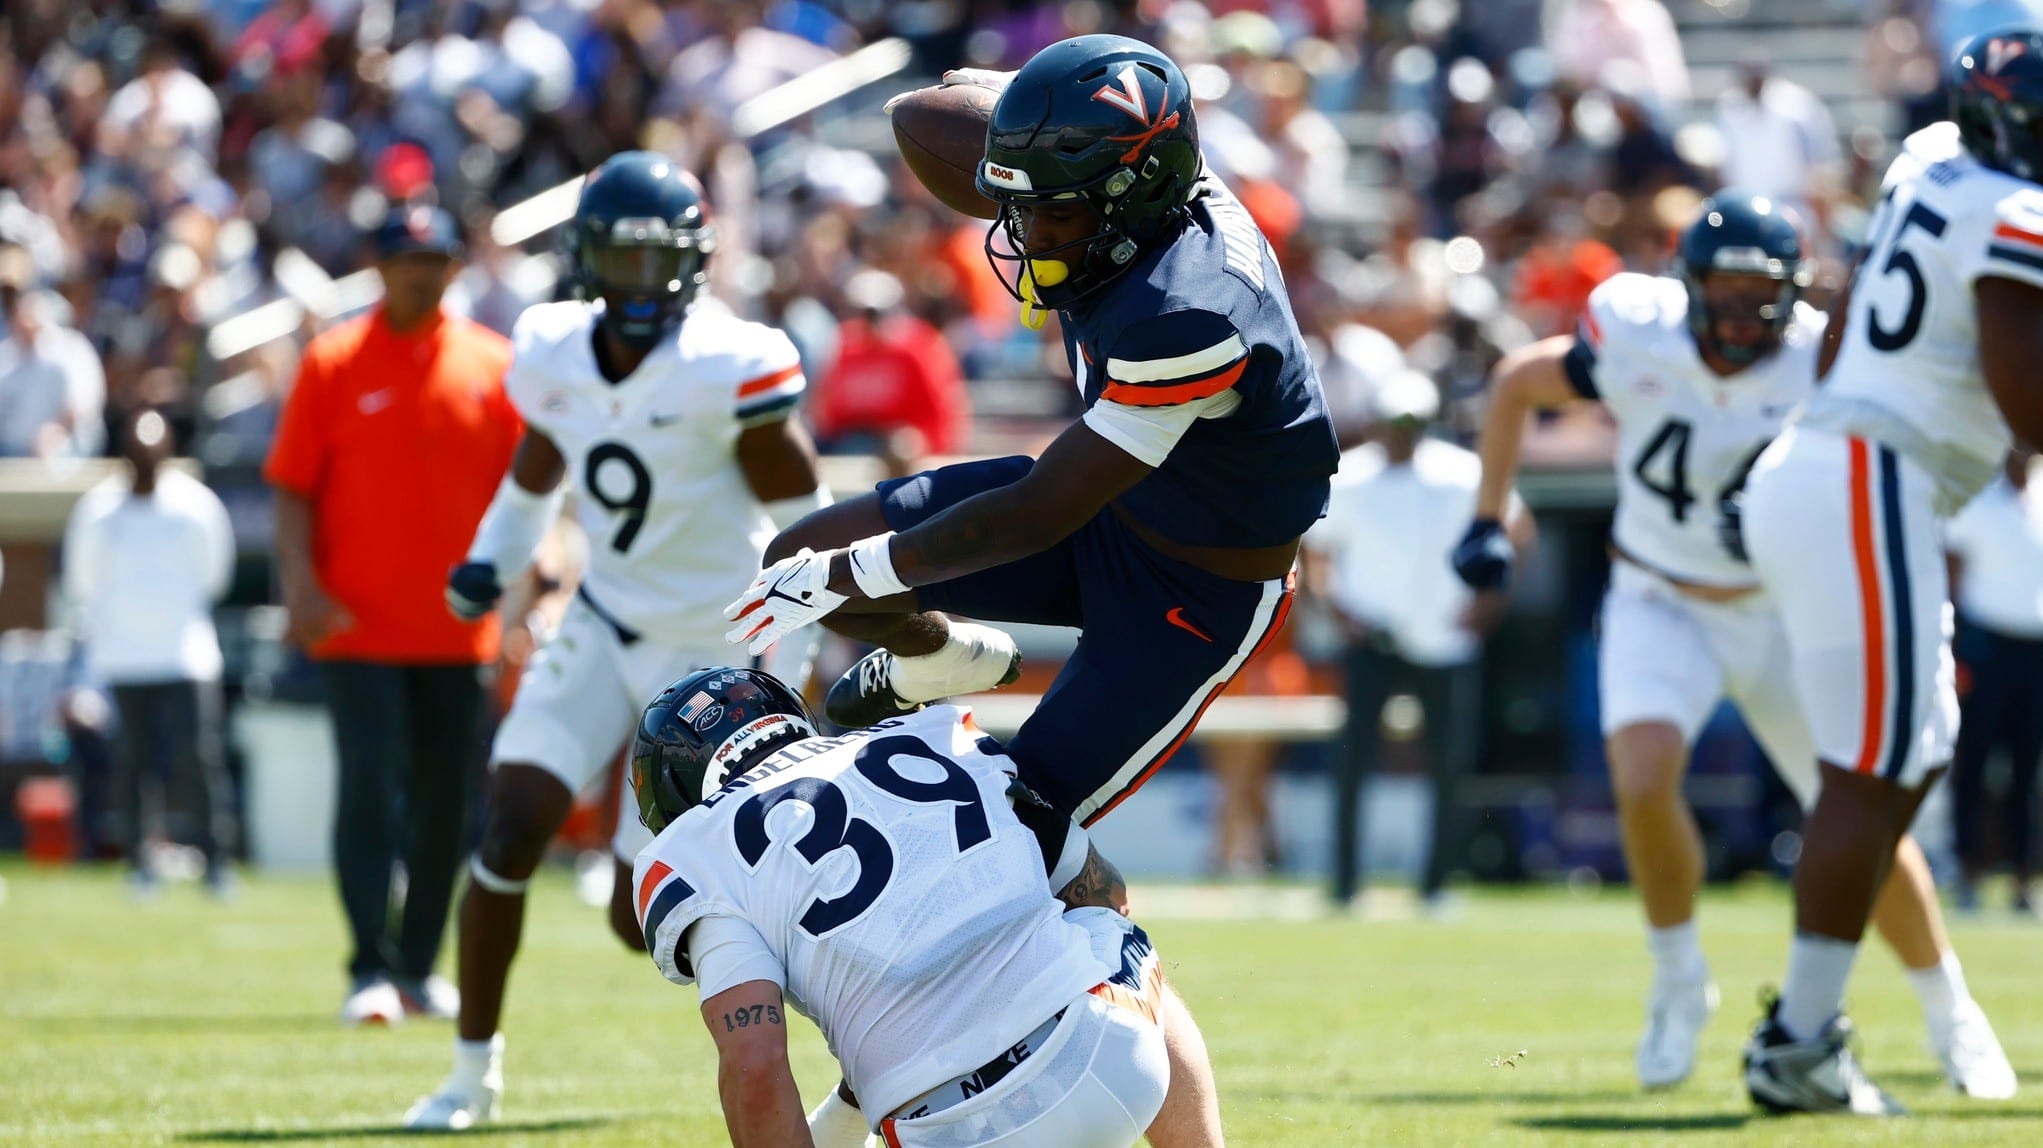 Five Standouts From the Virginia Football Spring Game